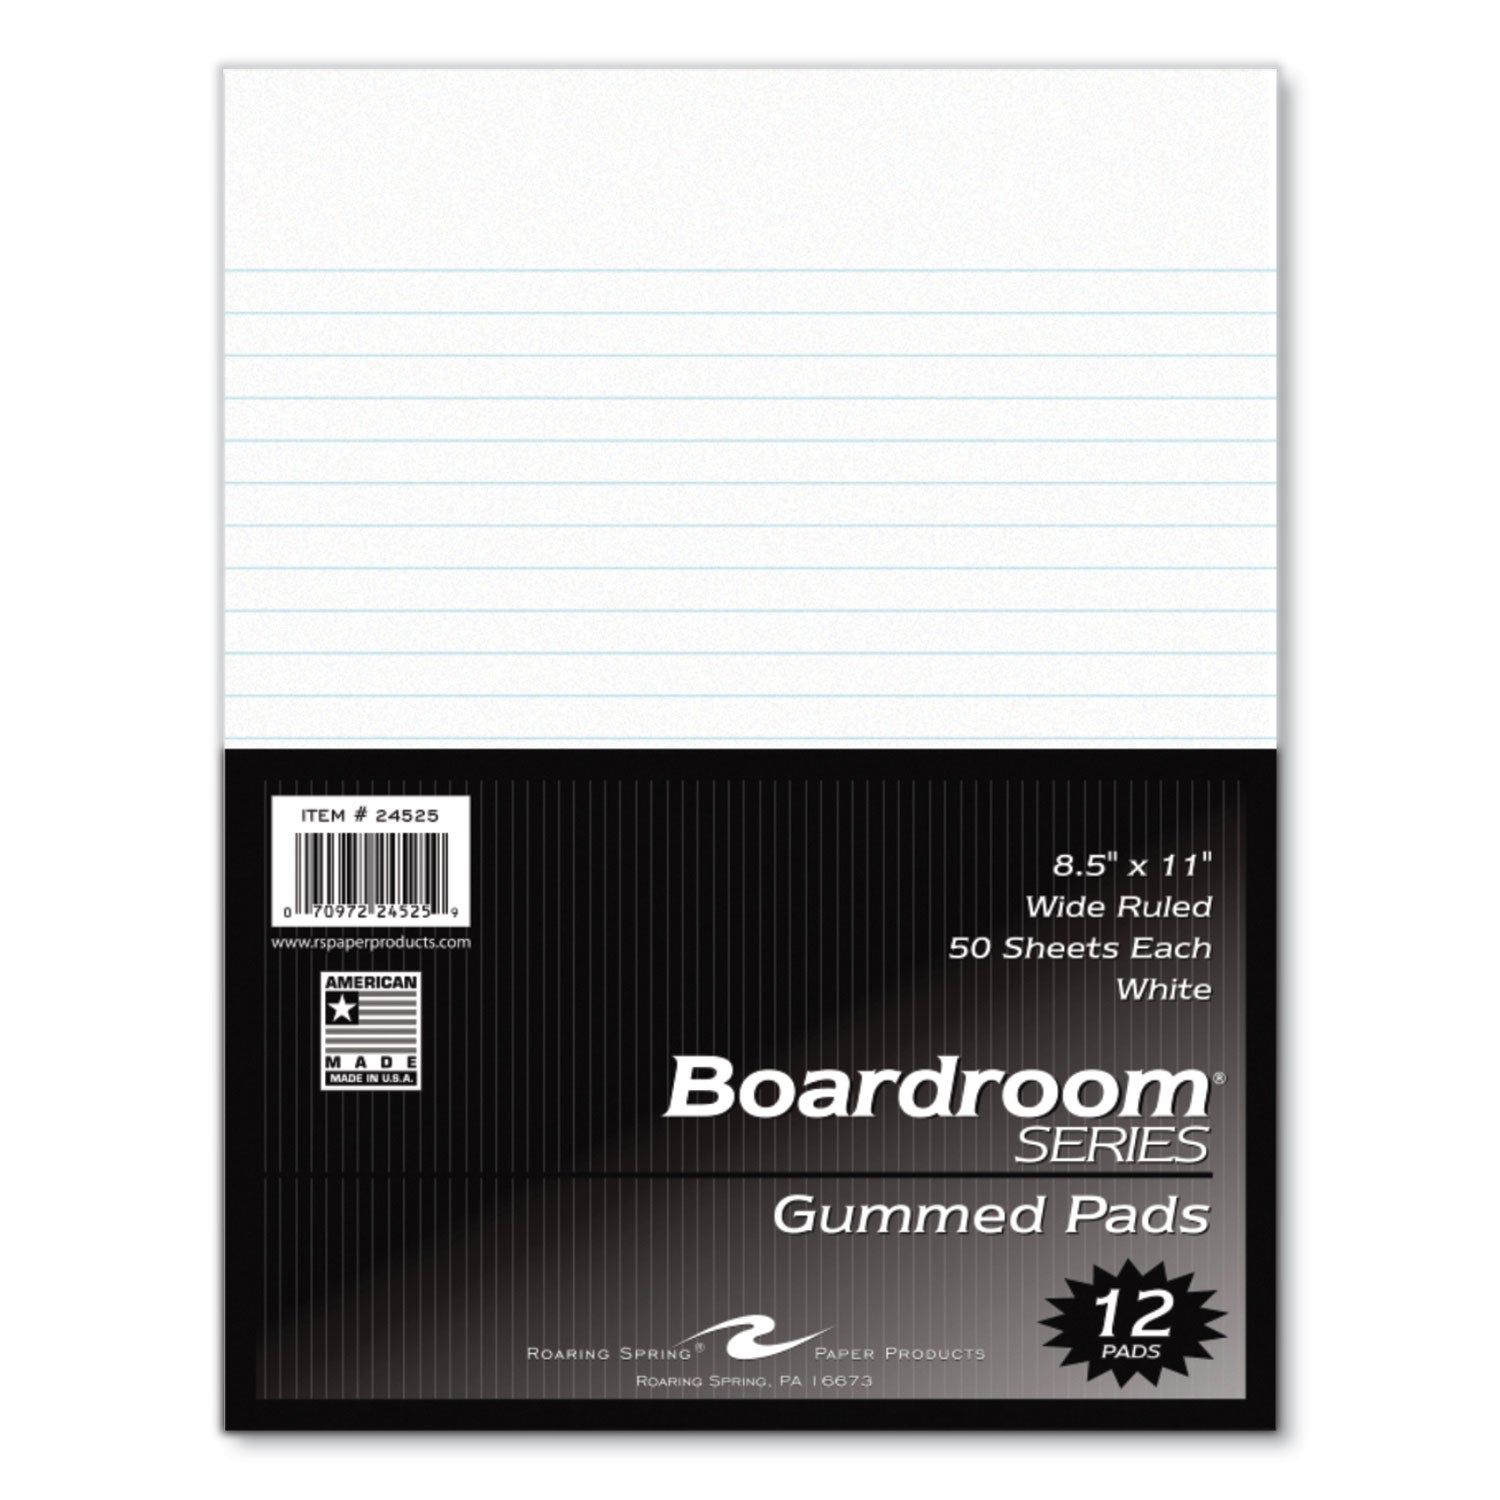 boardroom-gummed-pad-wide-rule-50-white-85-x-11-sheets-72-carton-ships-in-4-6-business-days_roa24525cs - 5